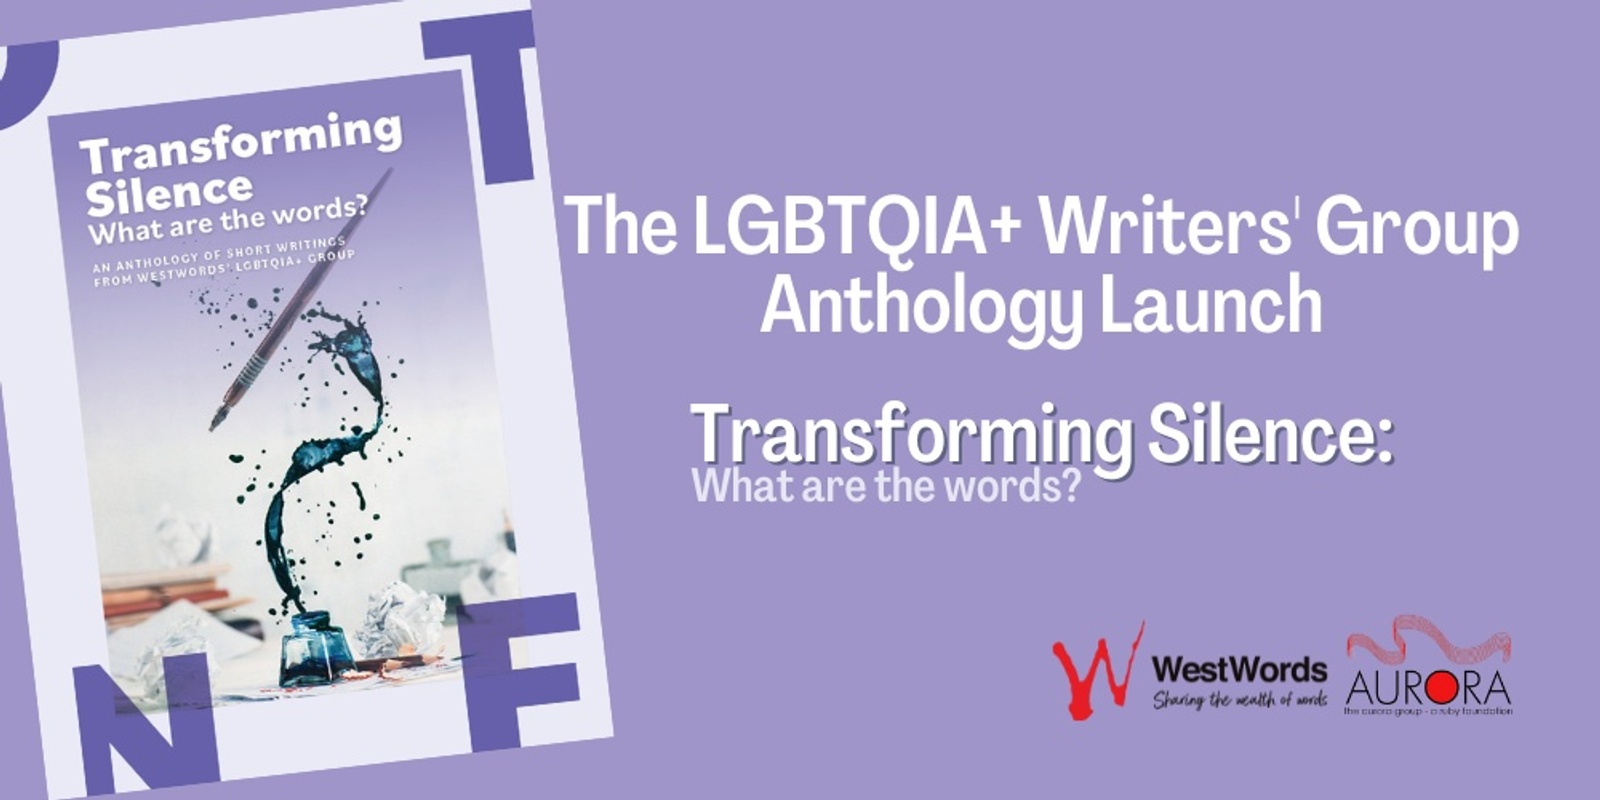 Banner image for Transforming Silence: Launch for the LGBTQIA+ Anthology